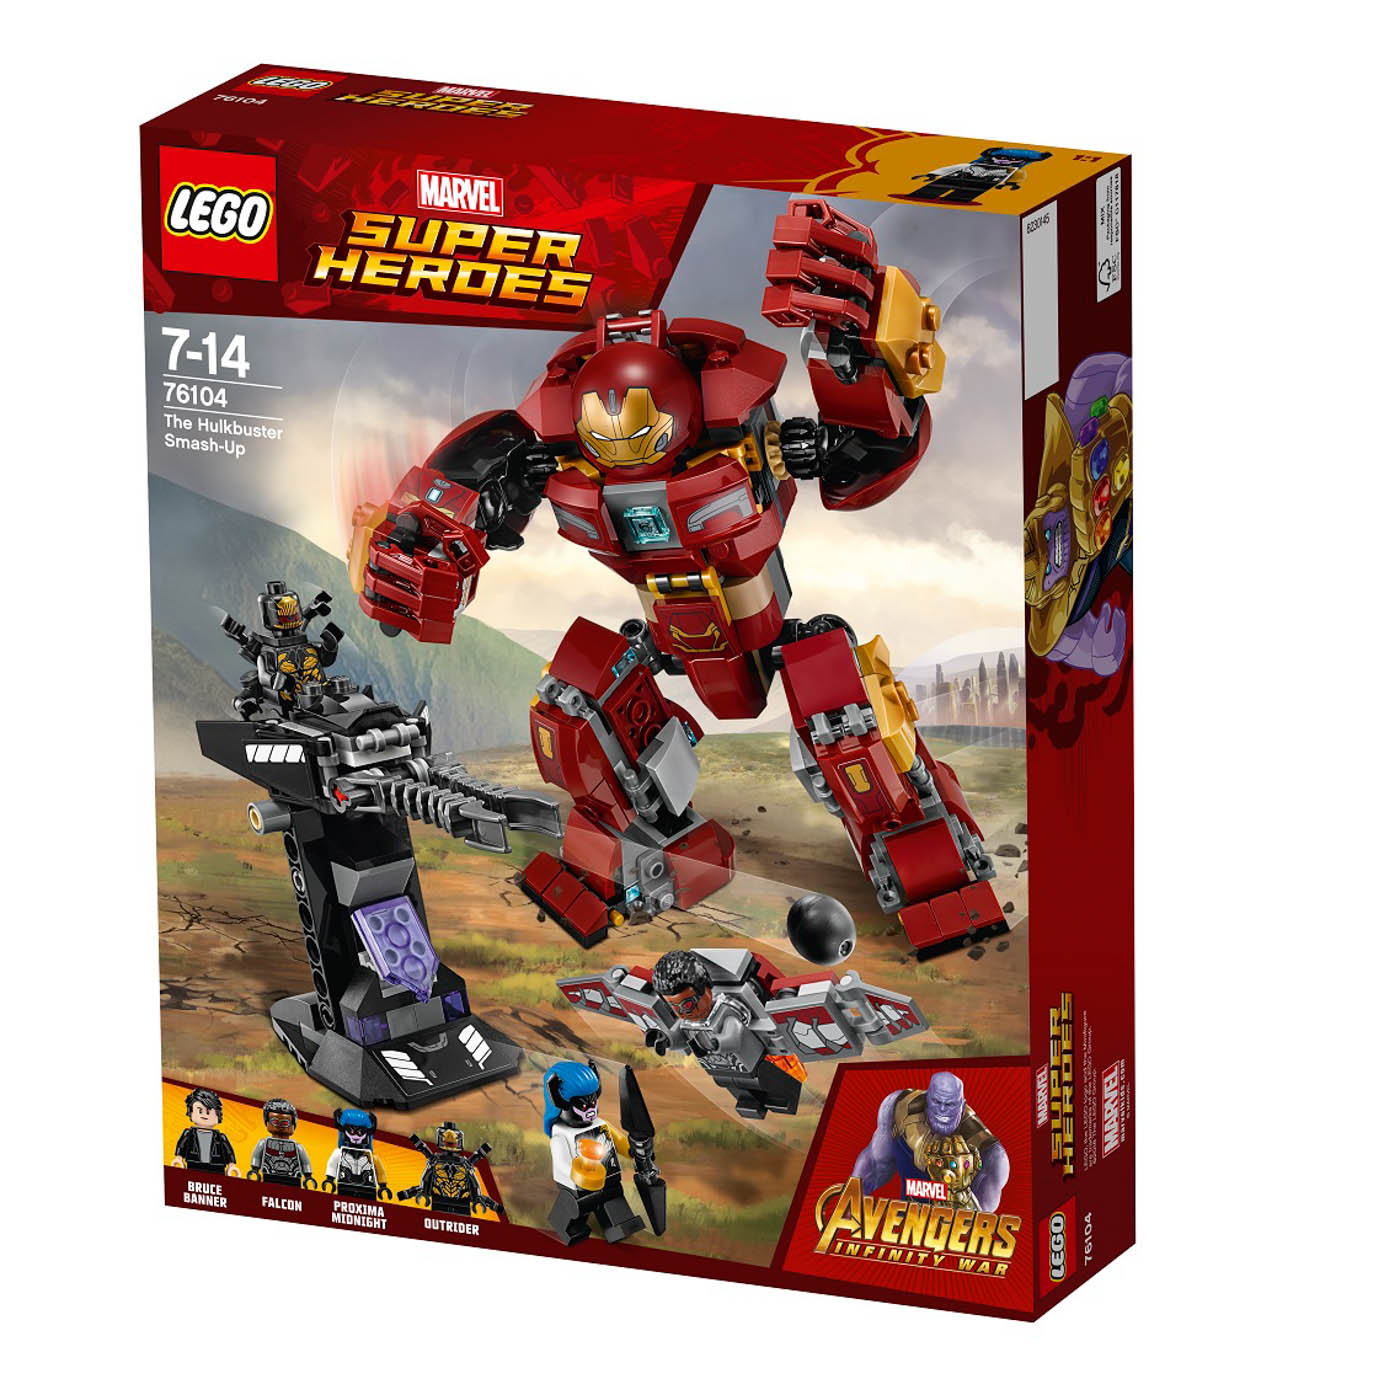 OVERPOWER PROXIMA MIDNIGHT. Lego Marvel Super Heroes Avengers Infinity War The Hulkbuster Smash-Up, P3099 at leading Toy Stores, Lego certified stores, and Hobbes and Landes. Photo courtesy of The Walt Disney Company (Philippines), Inc. 